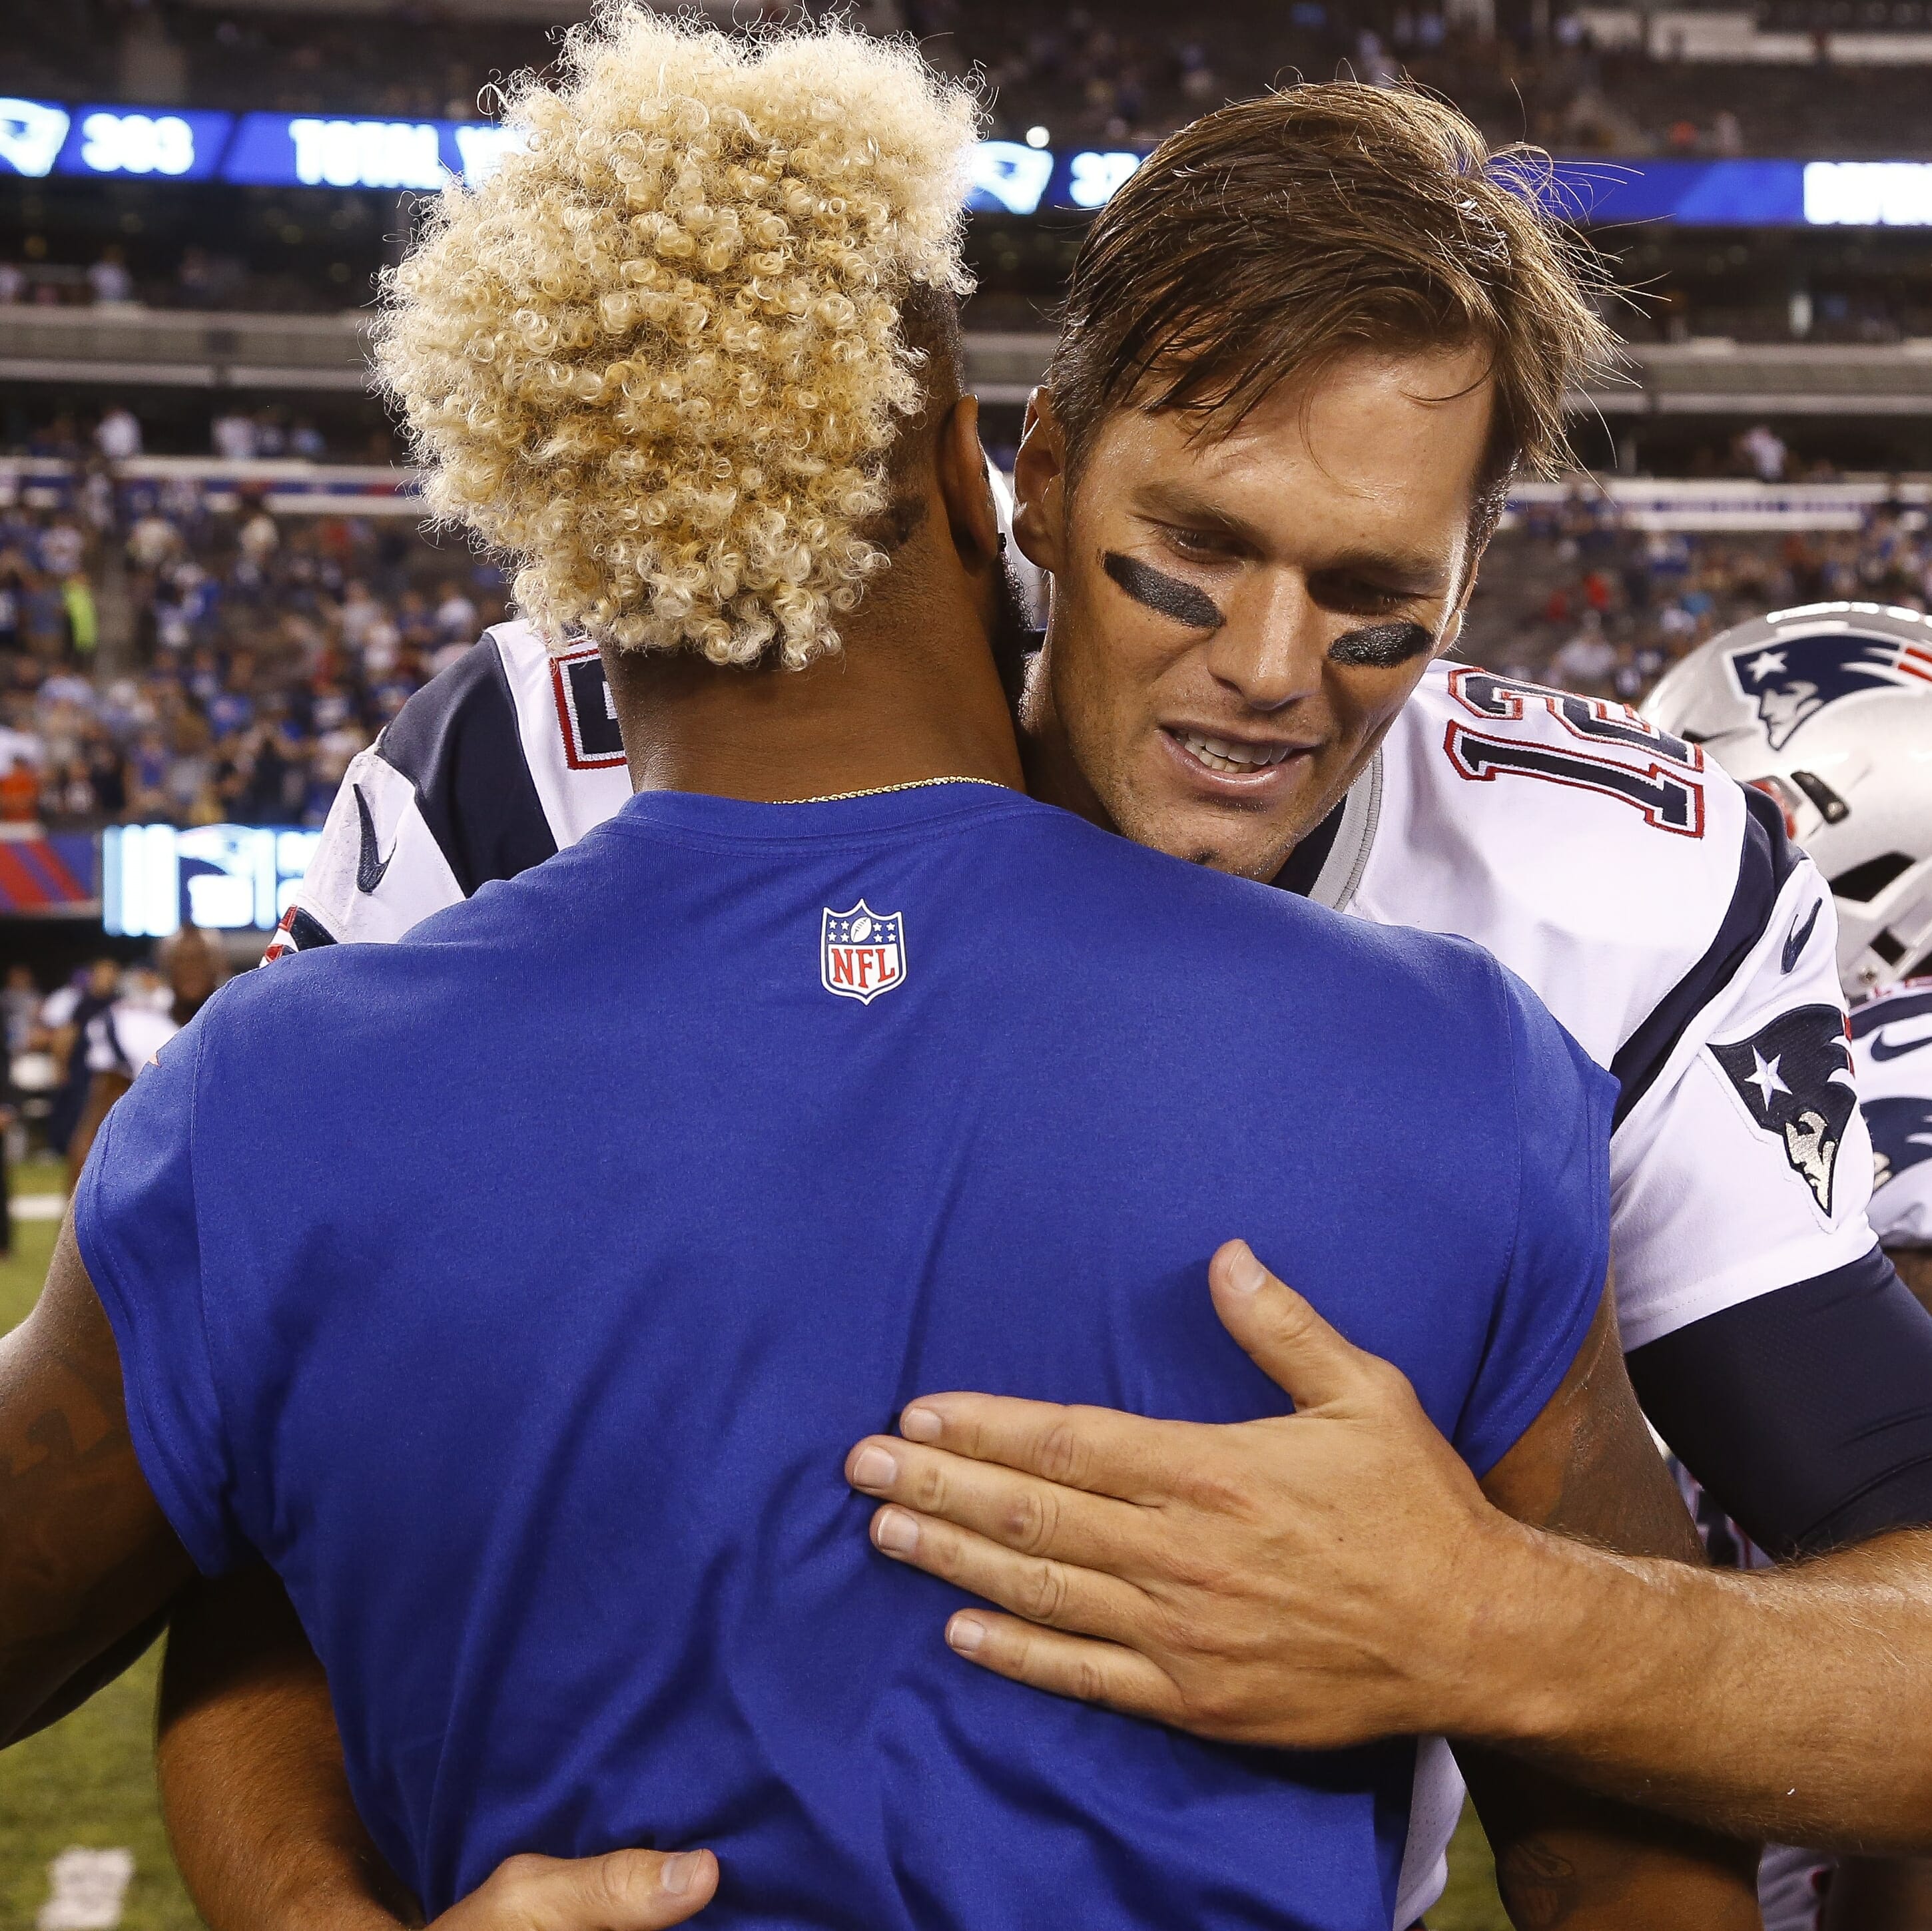 Mainstream Media Exposes Their Bias in Their NFL Coverage of Odell Beckham Jr. And Tom Brady's Outbursts